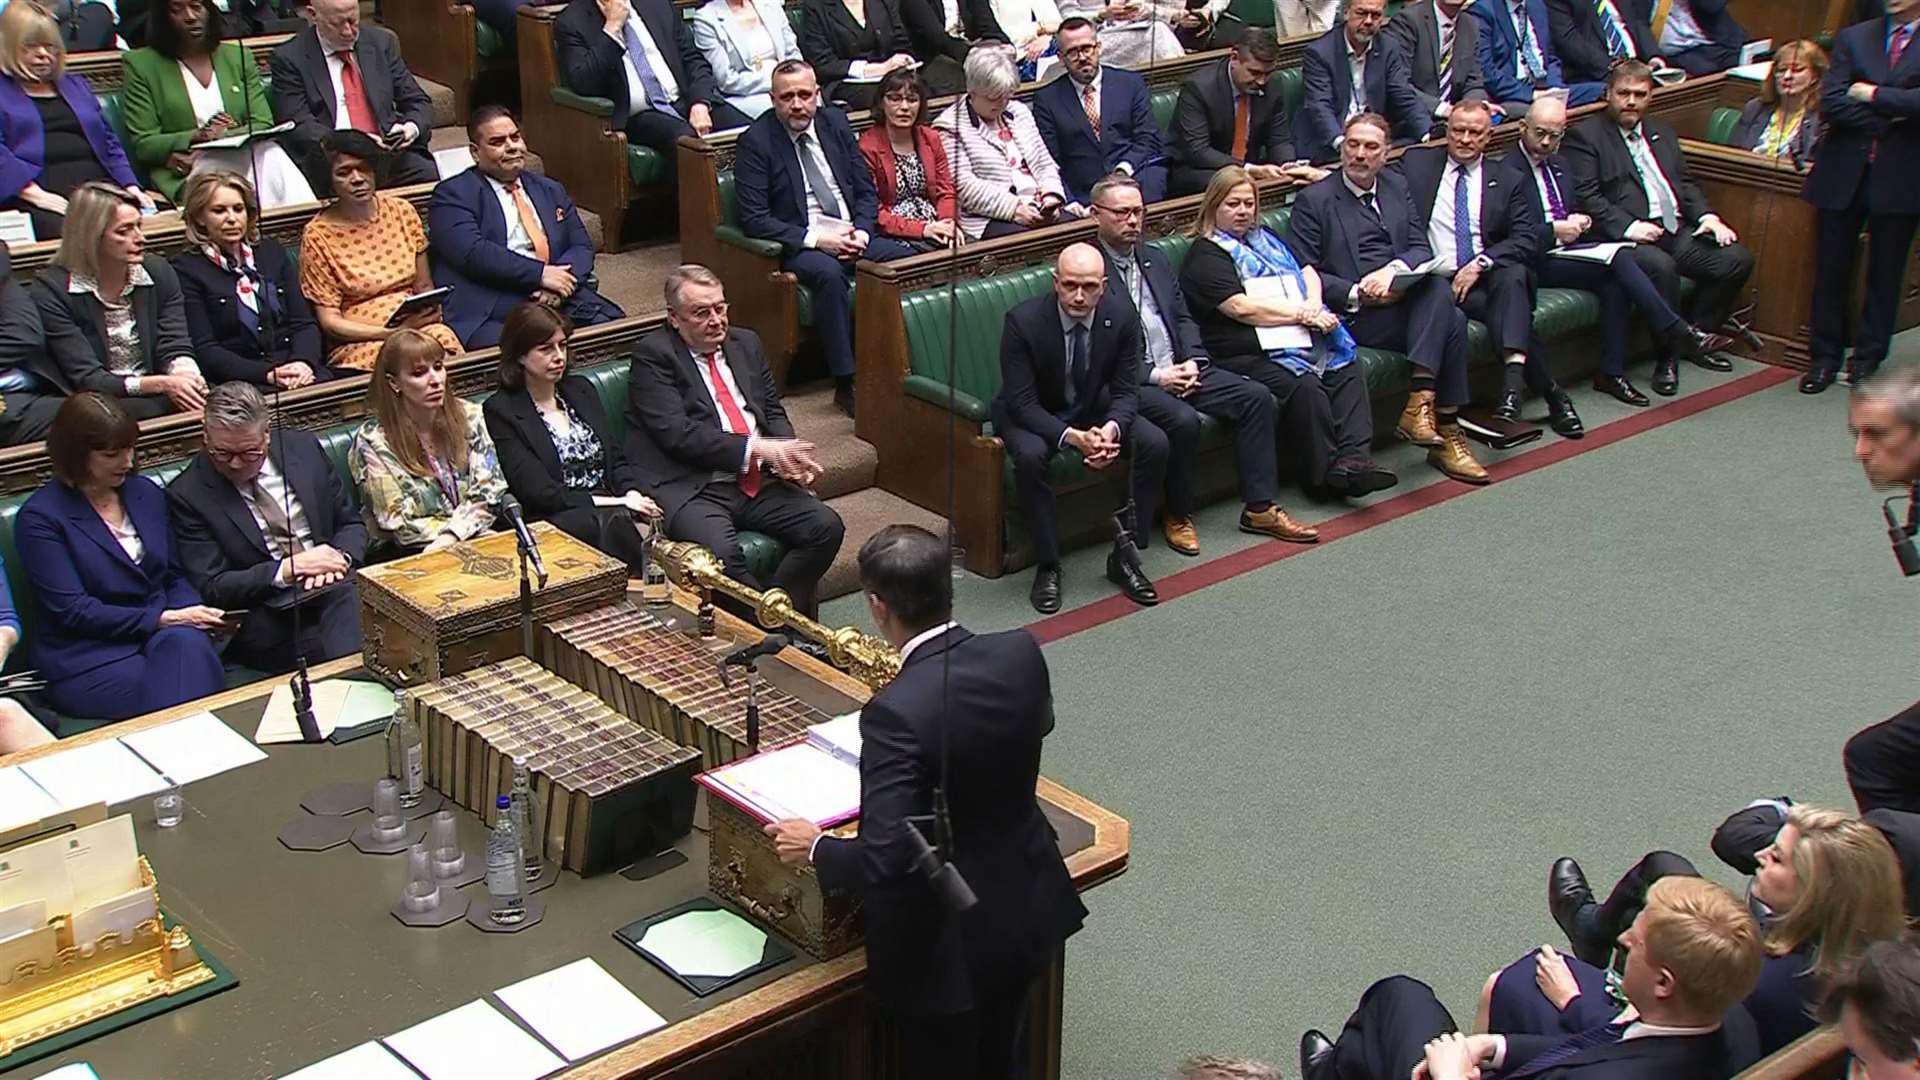 Former Tory MP Natalie Elphicke sitting with other Labour MPs (second row, second left, directly behind Angela Rayner) at Prime Minister’s Questions (House of Commons/UK Parliament/PA)